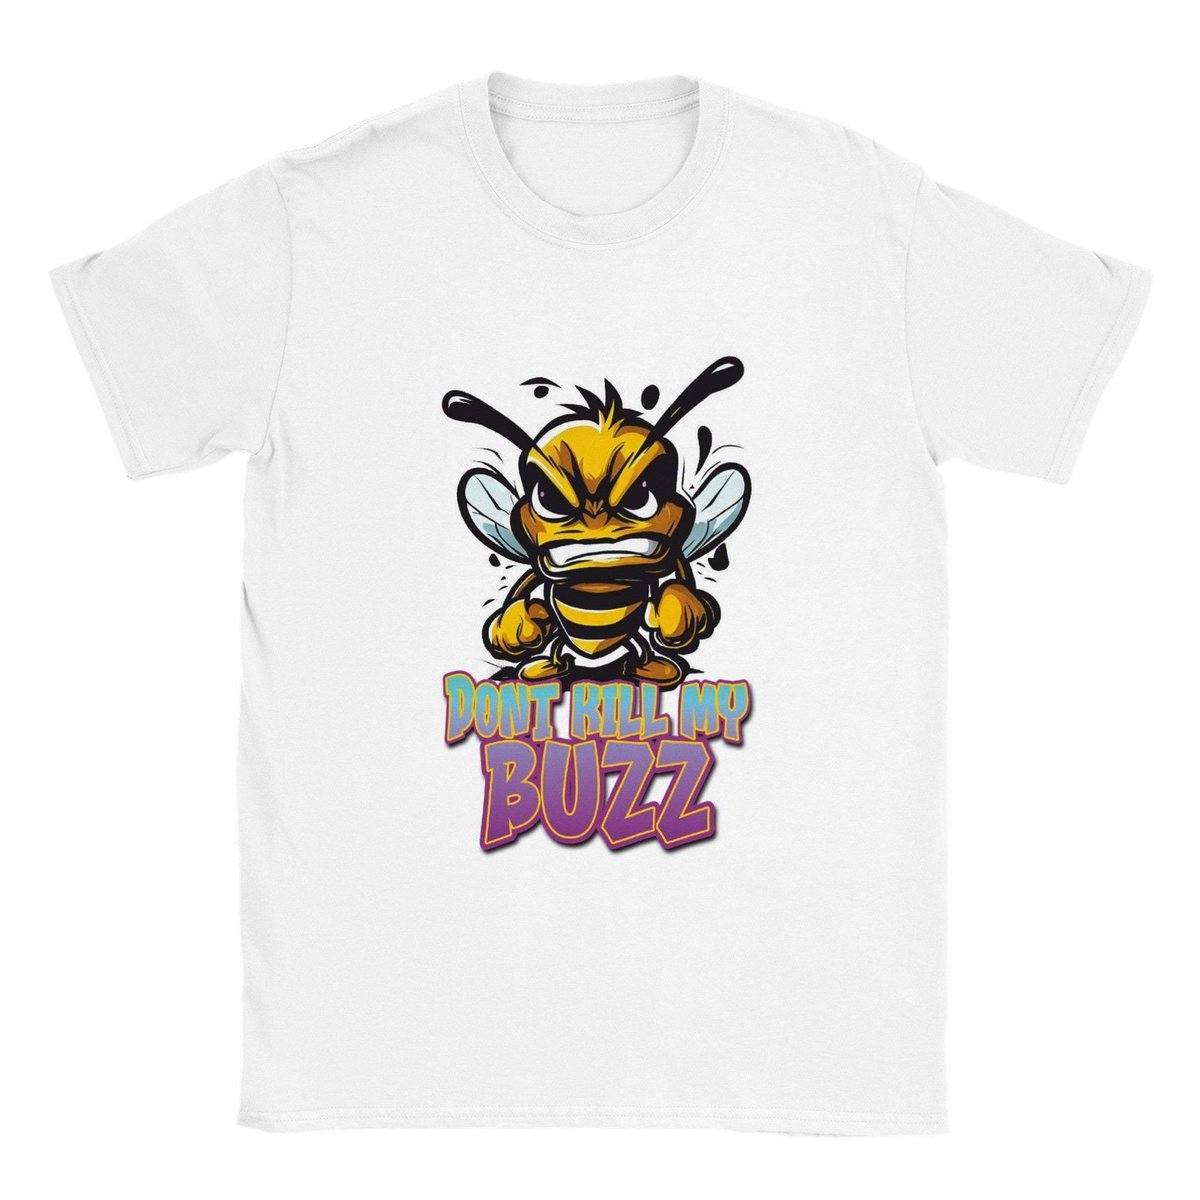 Dont Kill My Buzz - Angry Bee T-Shirt - Classic Unisex Crewneck T-shirt Australia Online Color White / S